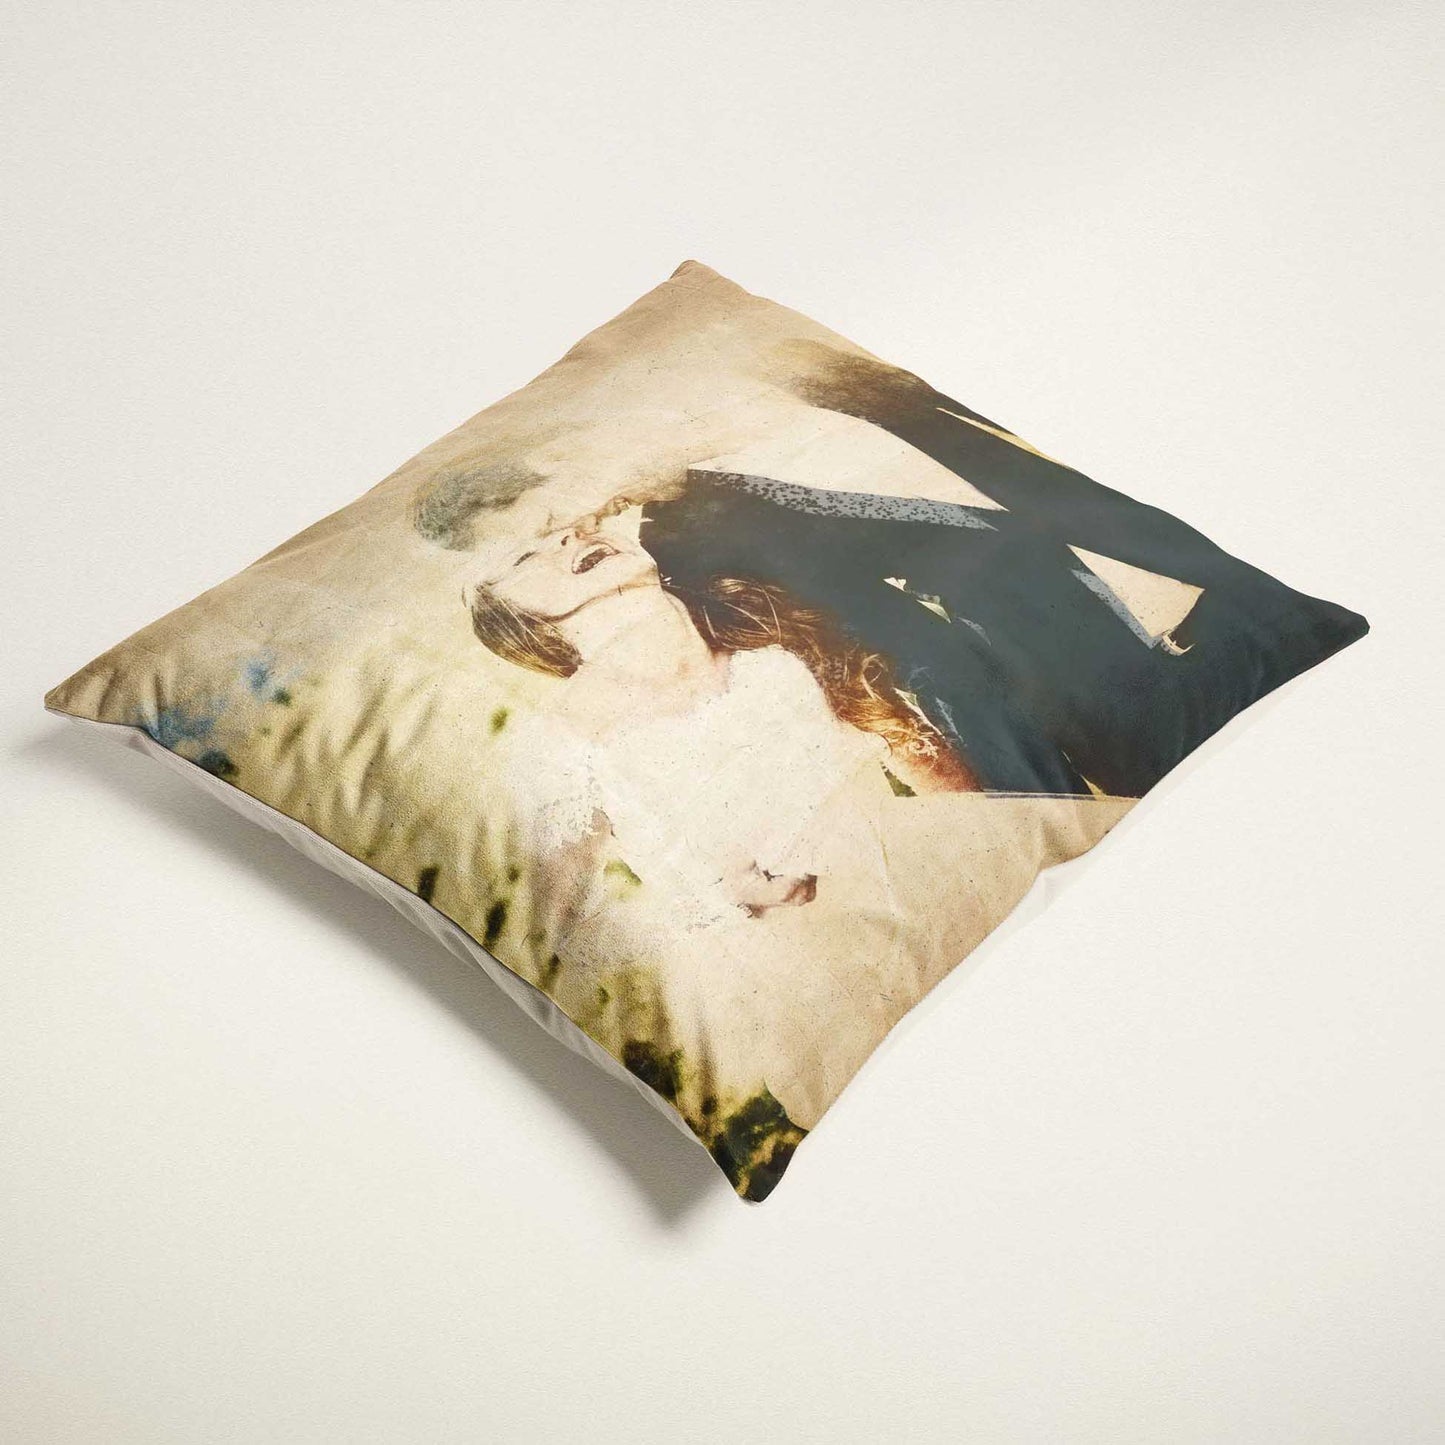 The Personalised Vintage Gouache Cushion is a true work of art for your home decor. Featuring a painting from your photo, created with watercolour technique, it captures an authentic and real artistic essence, handmade